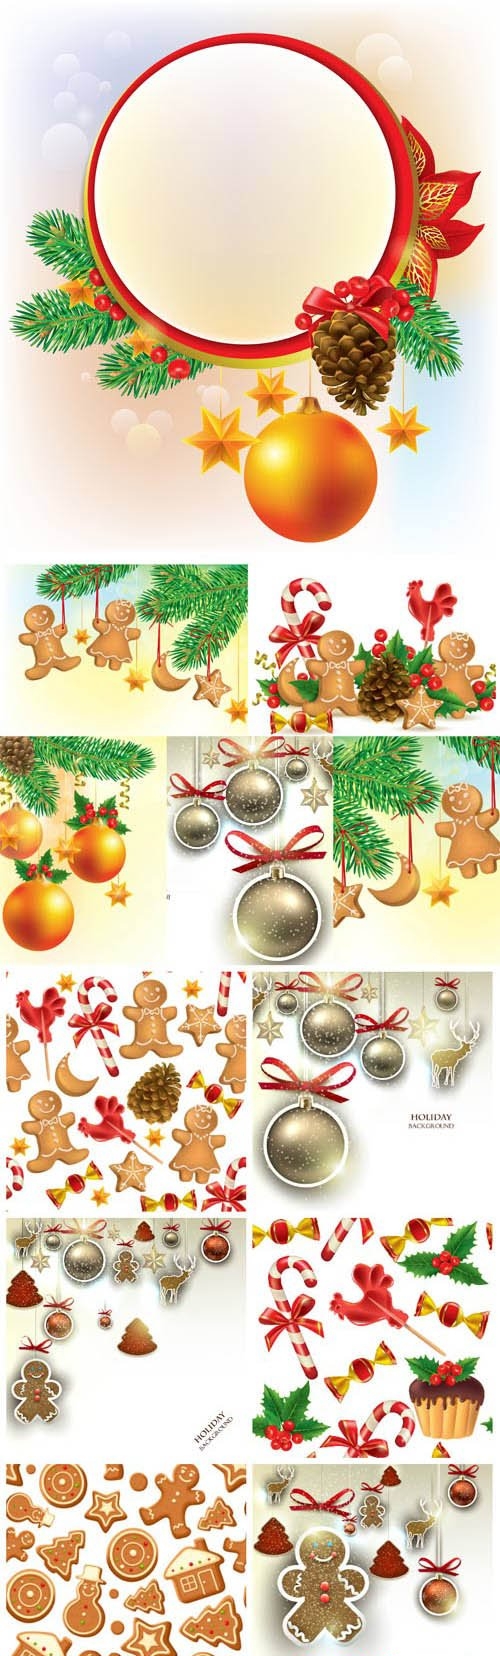 New Year and Christmas illustrations in vector - 48